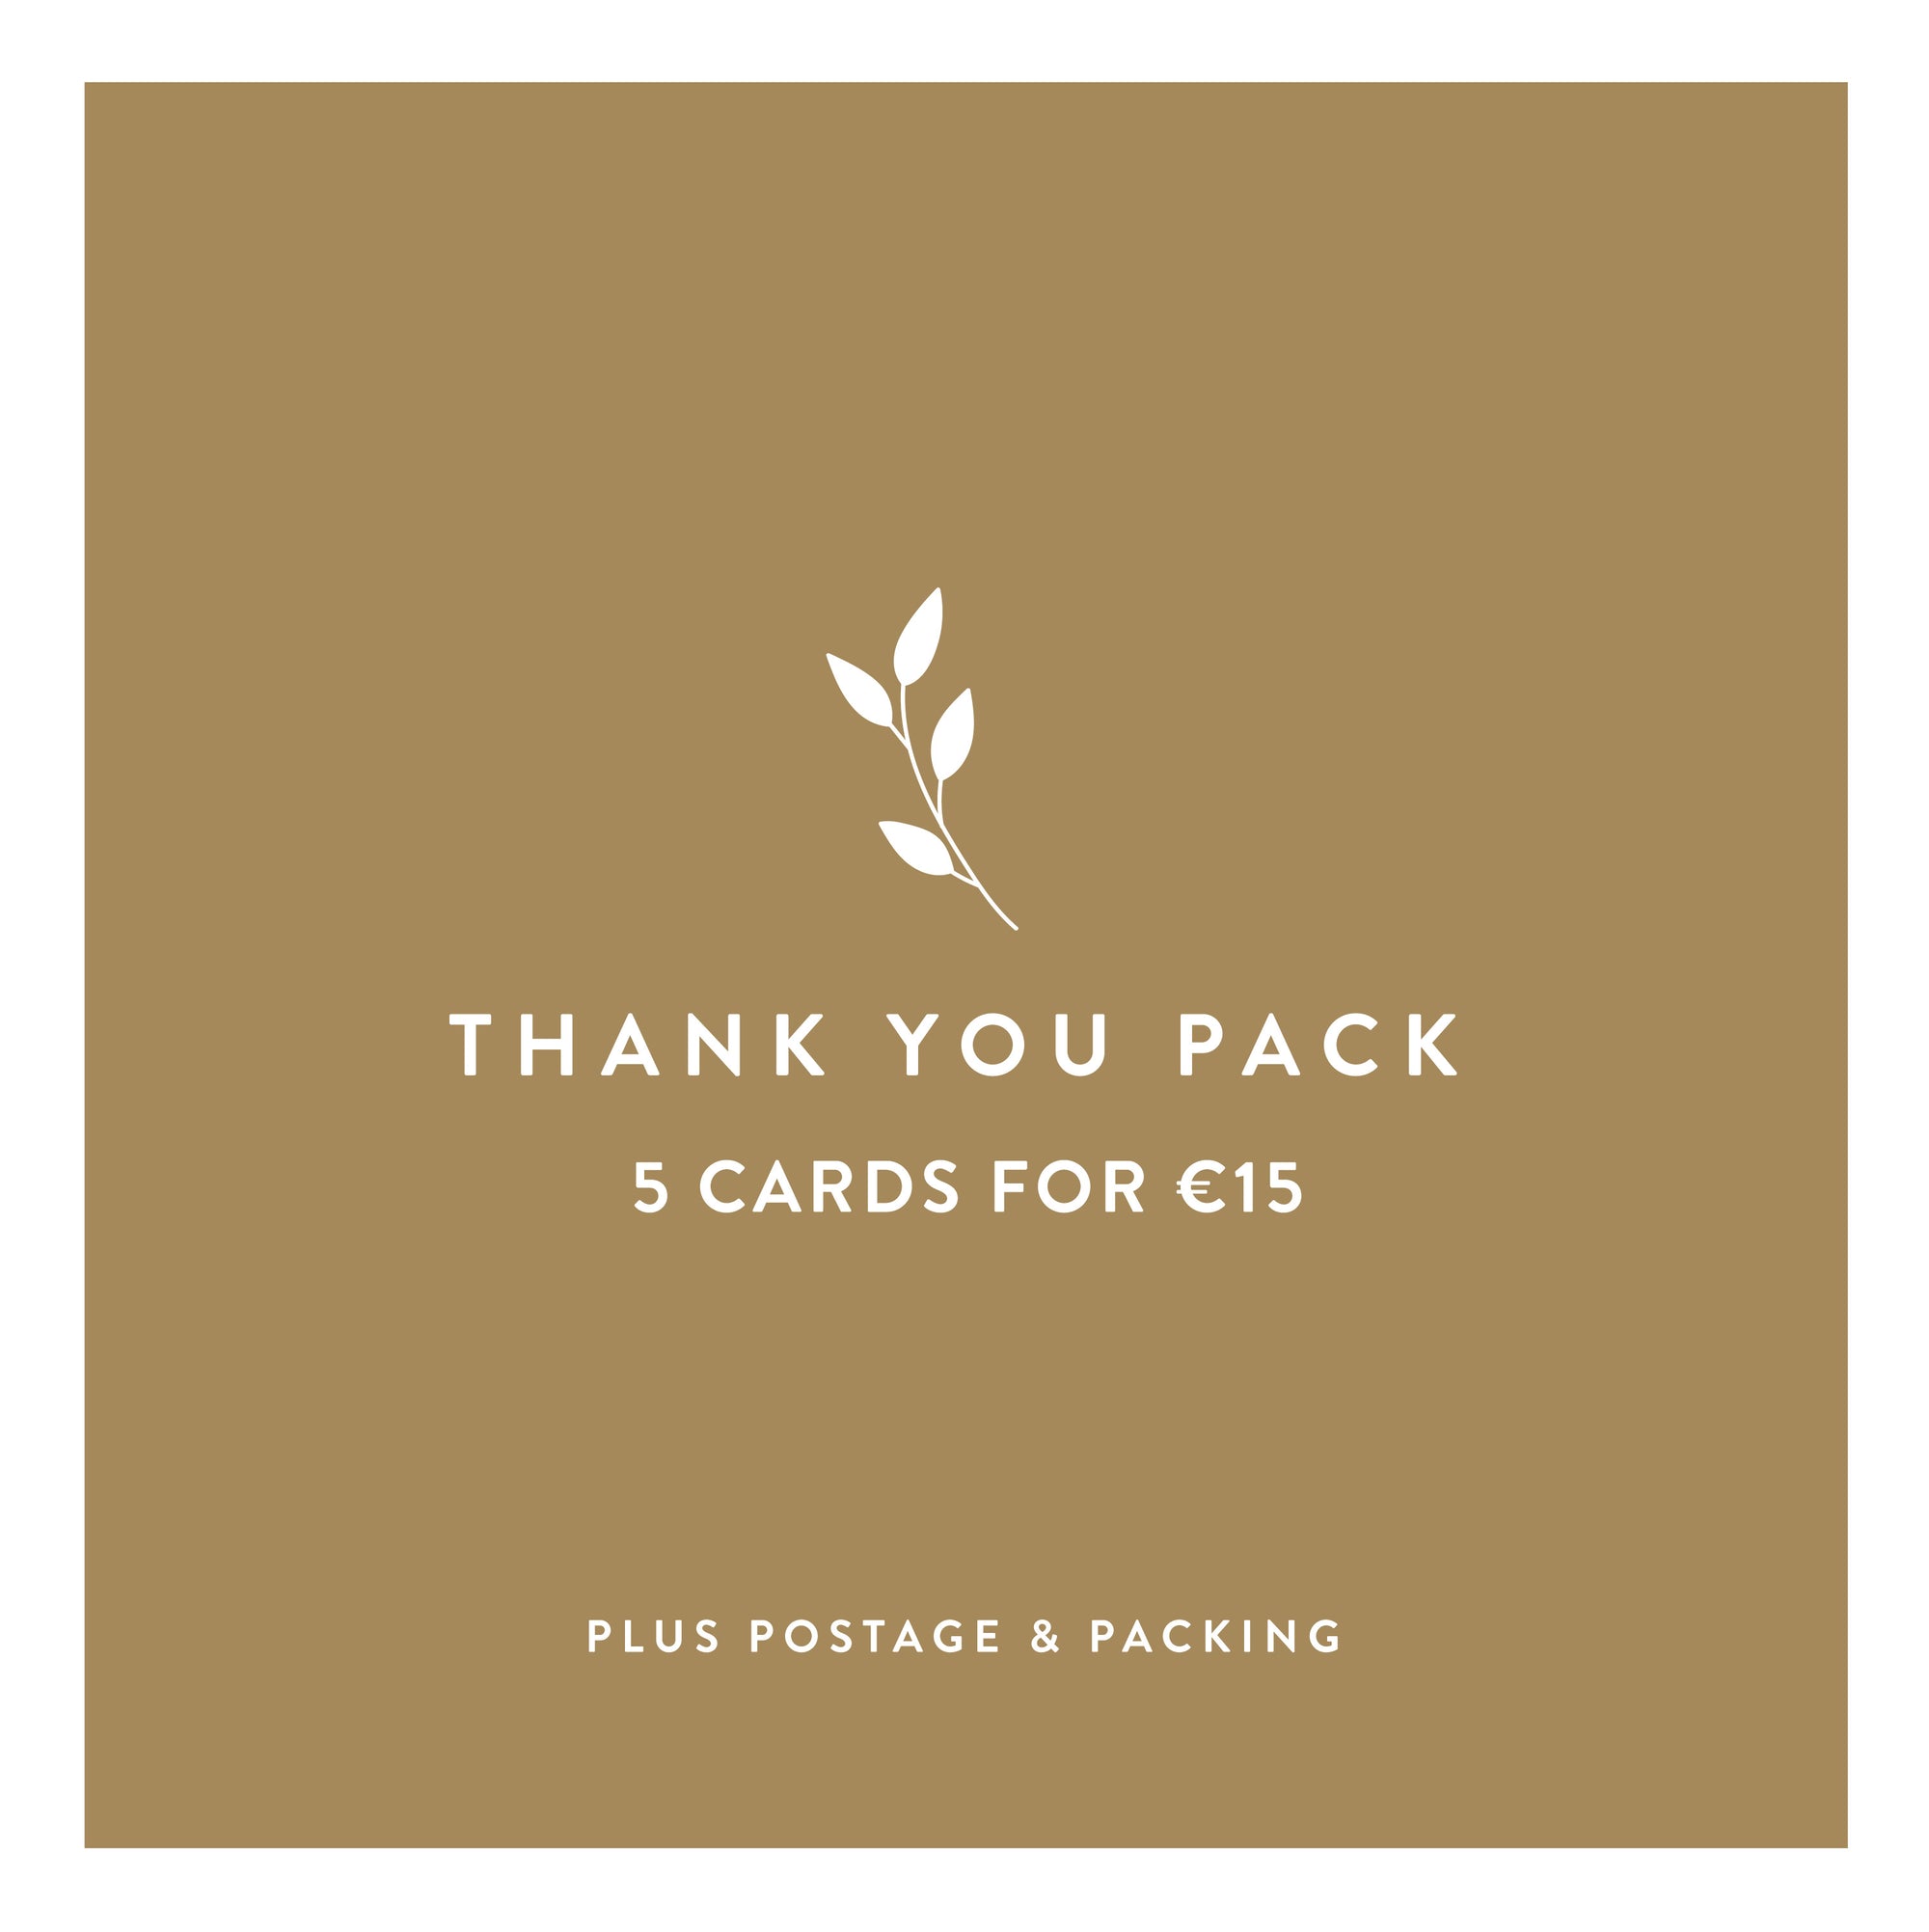 Thank you pack - 5 cards for €15